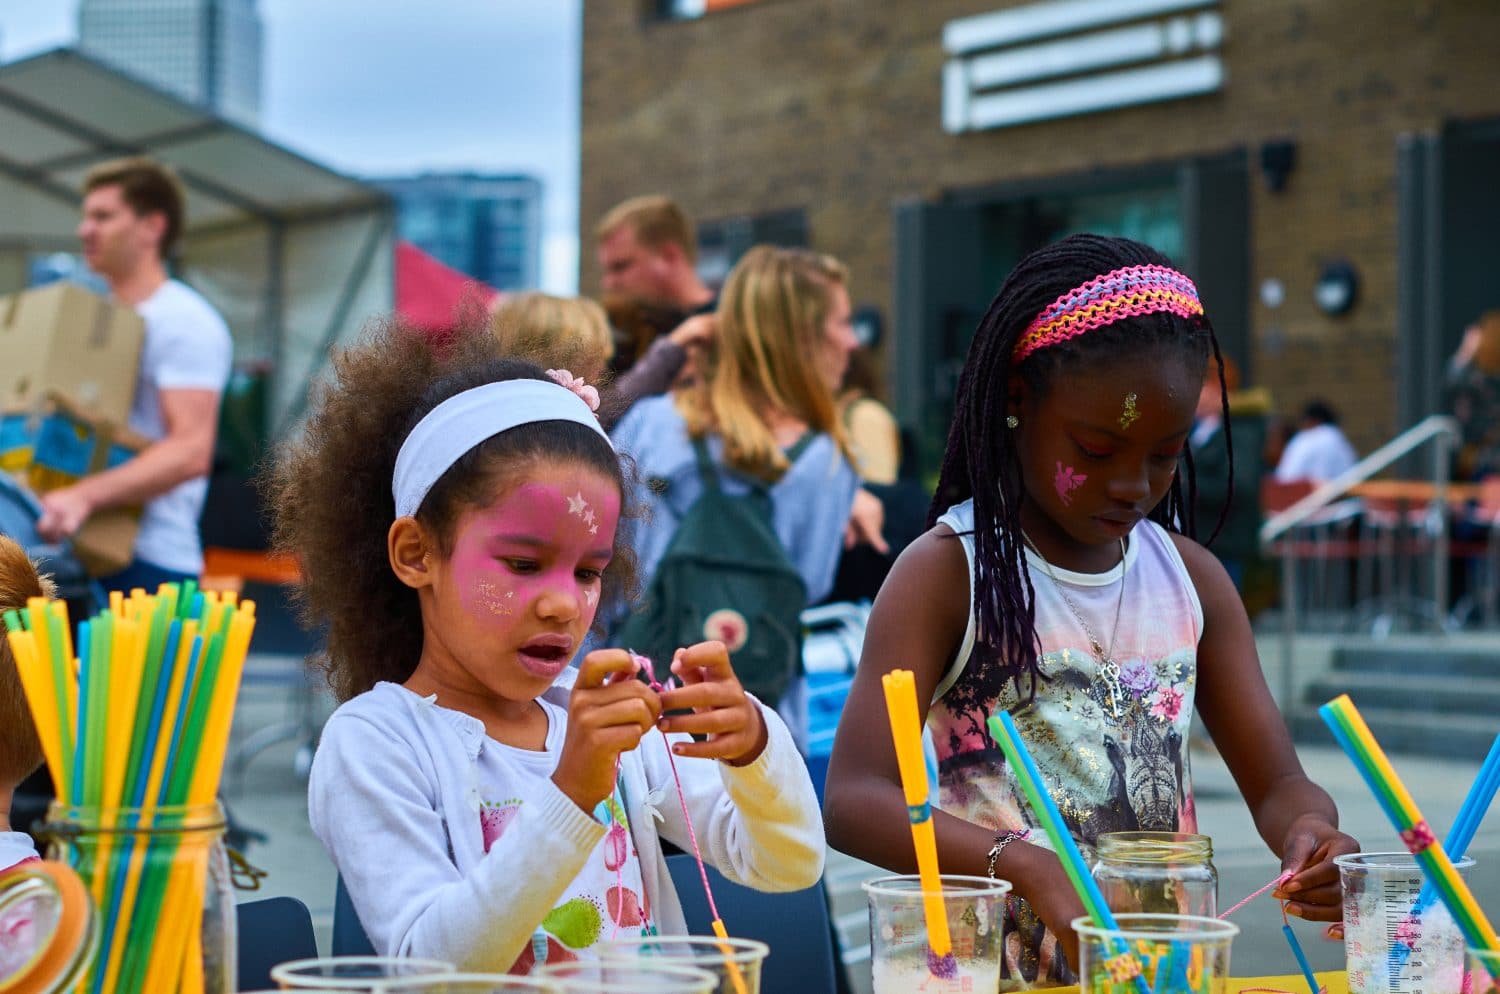 Poplar Union, Discover Poplar, Community street party, arts and crafts, east London, kids and family, art centre